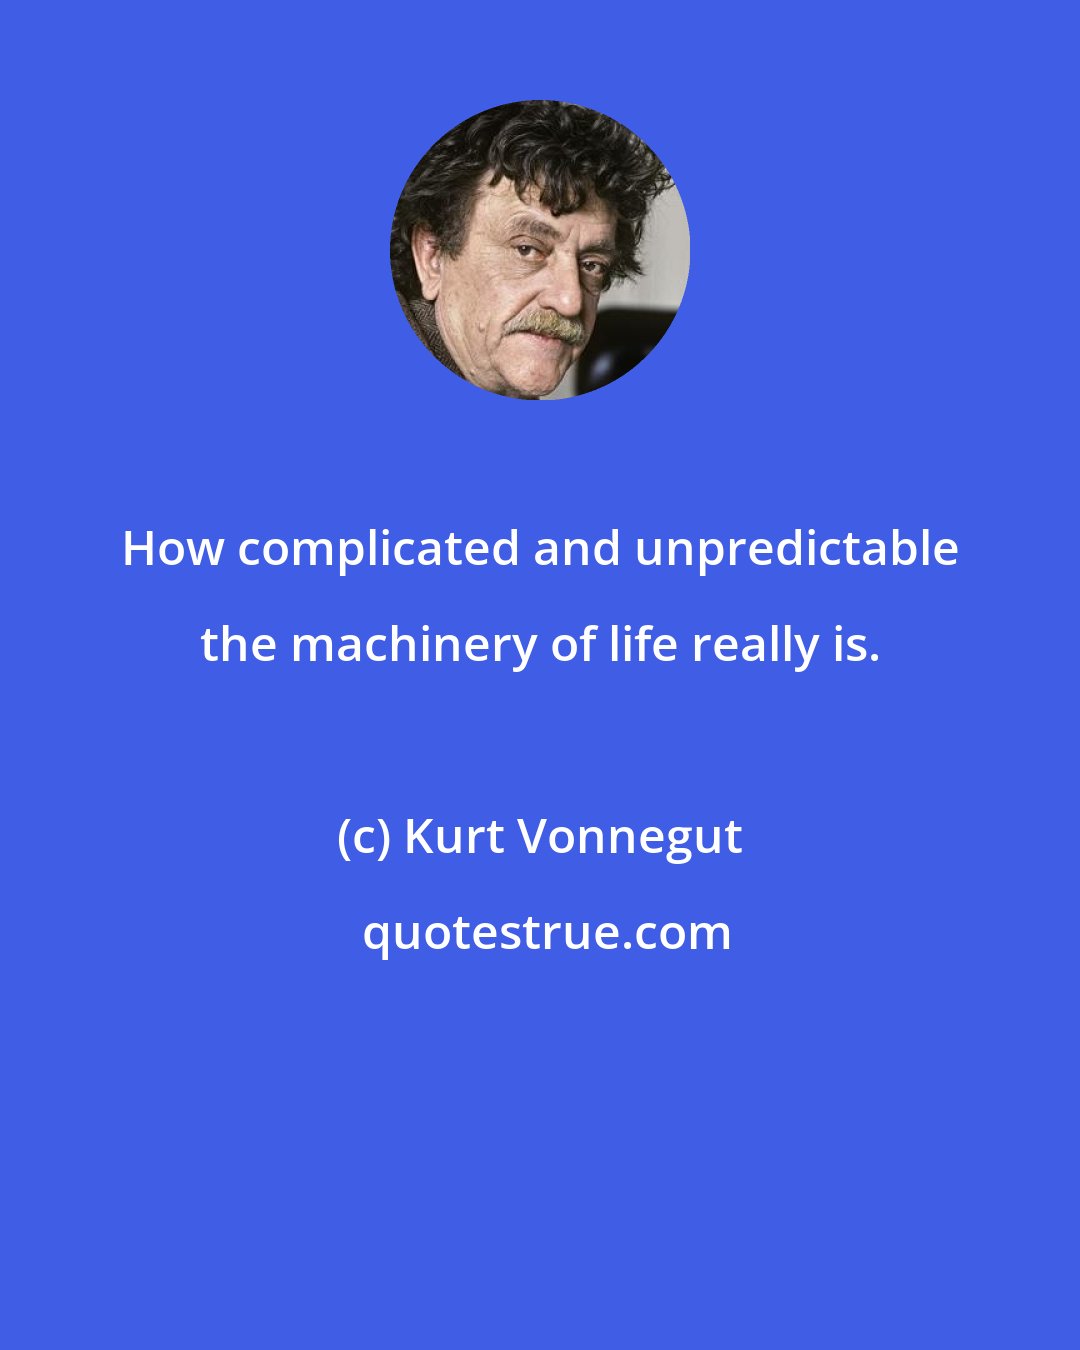 Kurt Vonnegut: How complicated and unpredictable the machinery of life really is.